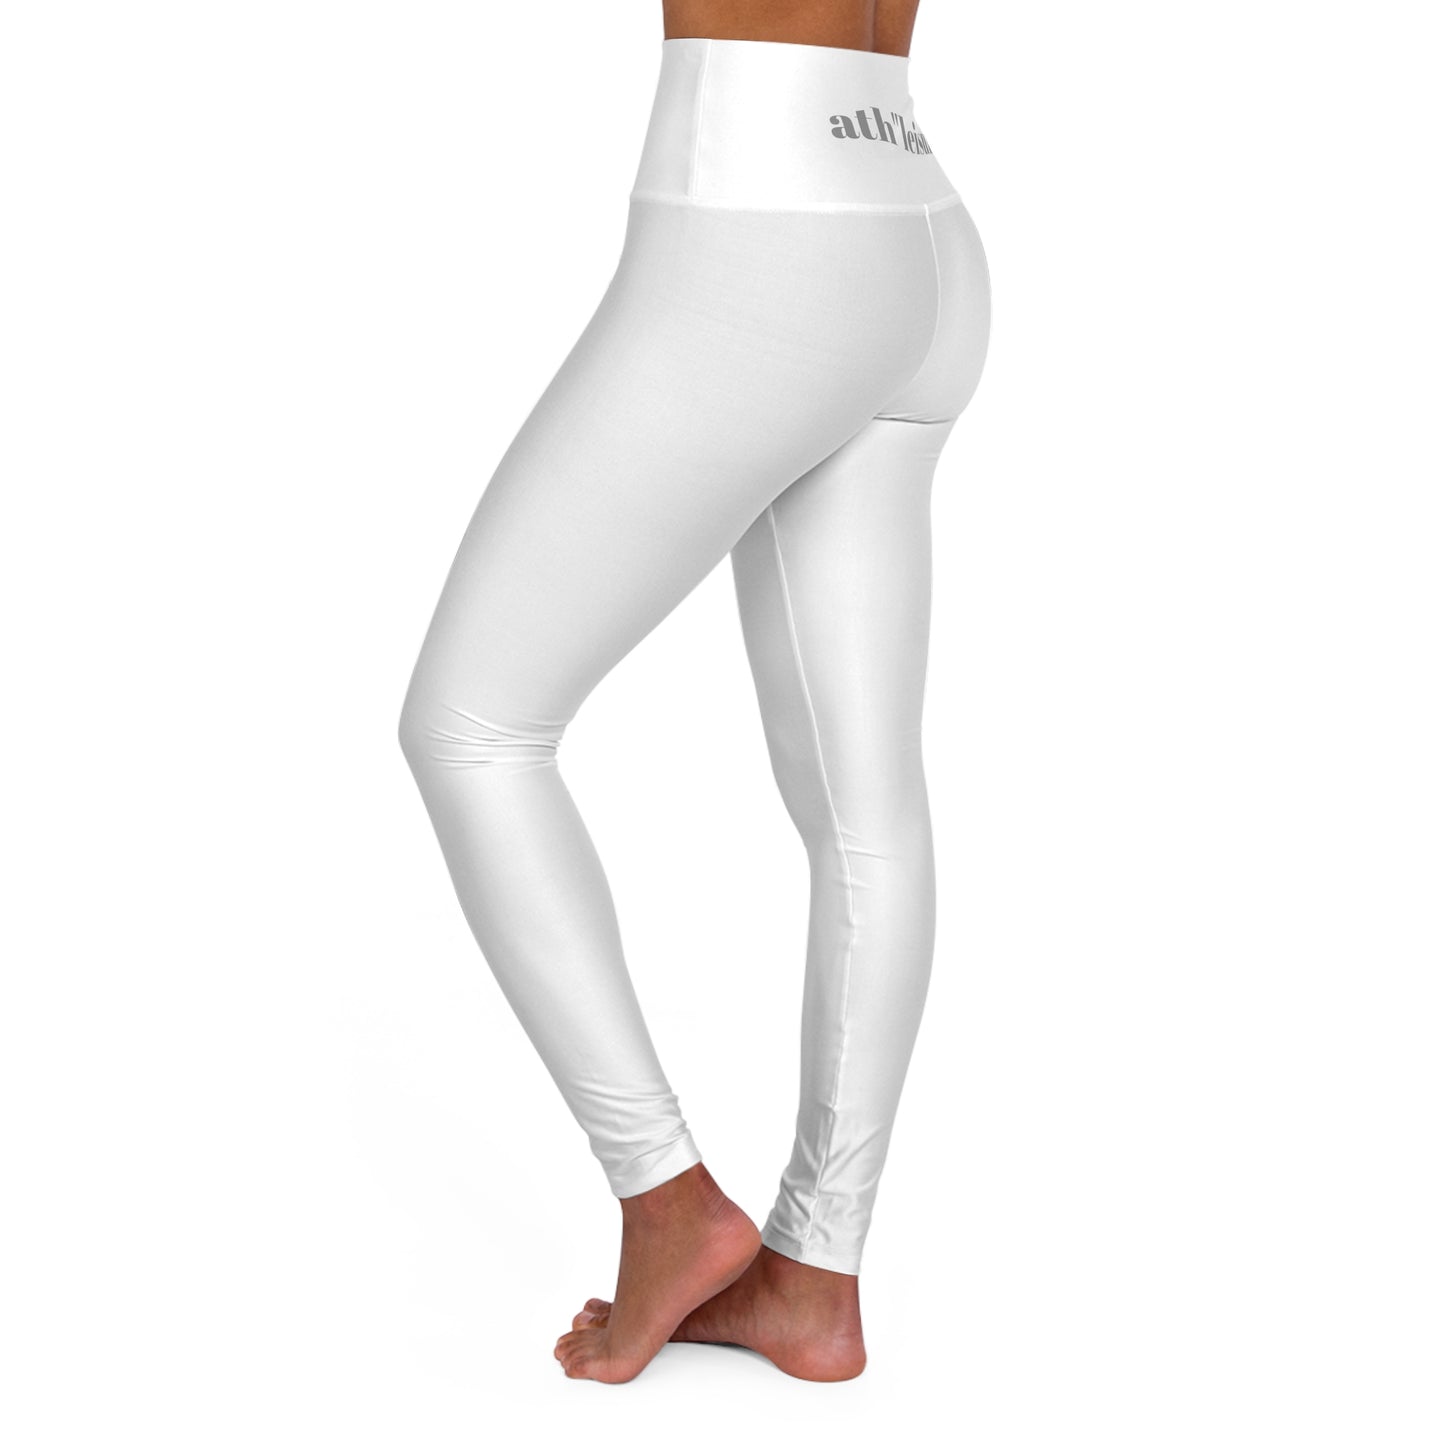 Ath"leisure" Collection- Ath"leisure" Women's High Waisted Yoga Leggings